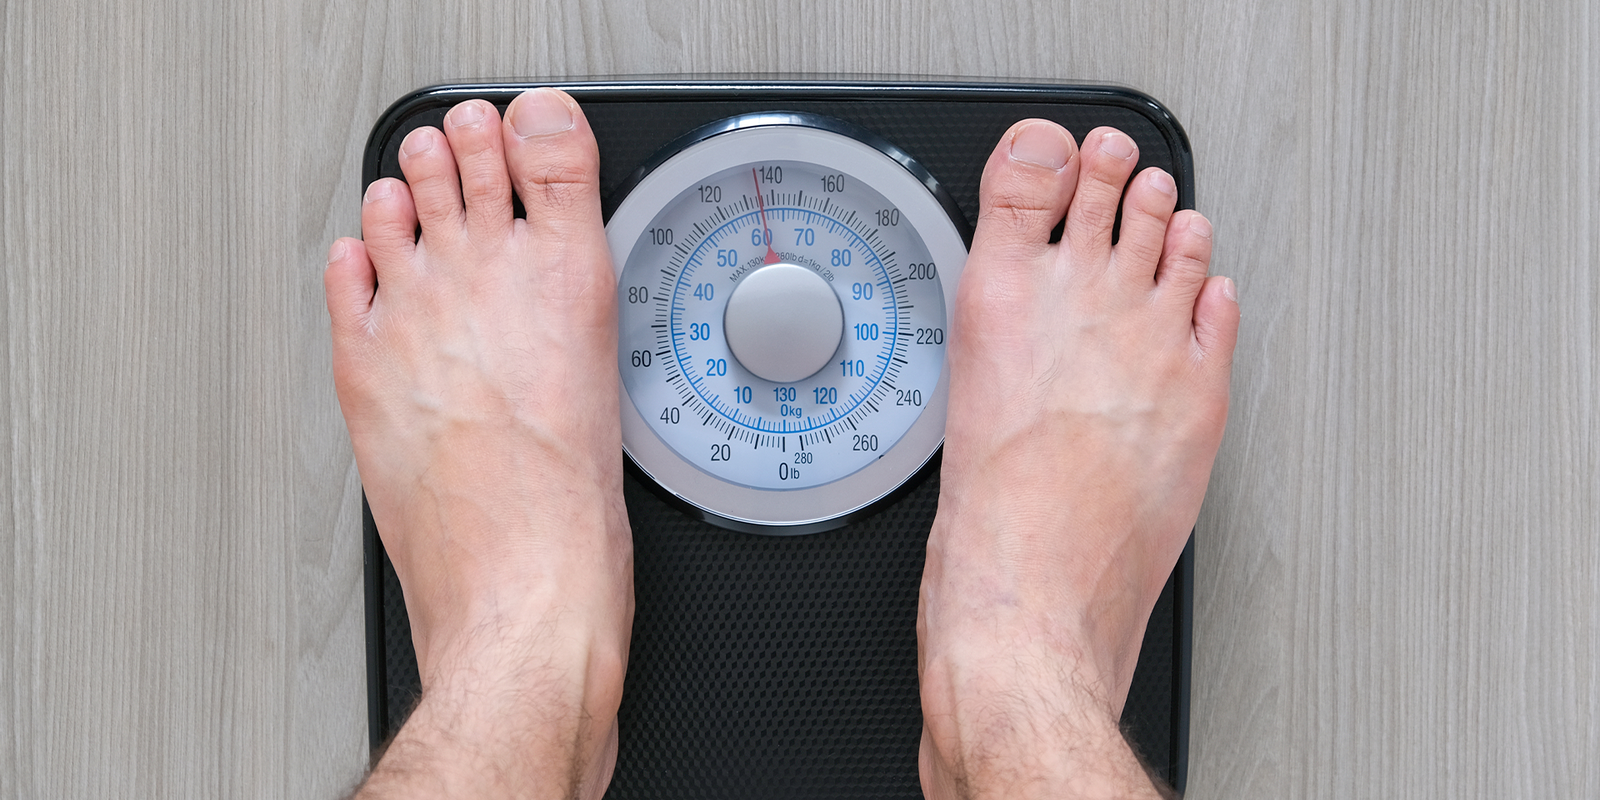 How does testosterone impact weight loss in men?